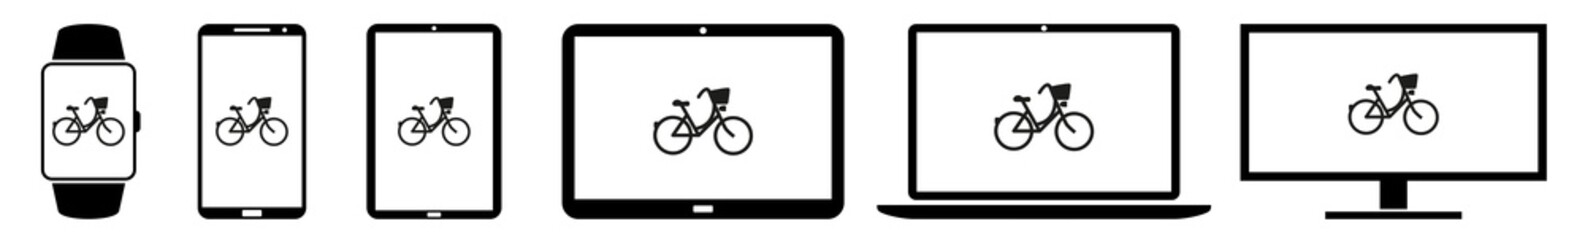 Display Bicycle Bicycles Mountain Bike Icon Devices Set | Web Screen Cycle Biking Cycling Riding Device Online | Laptop Vector Illustration | Mobile Phone | PC Computer Smartphone Tablet Sign Isolated